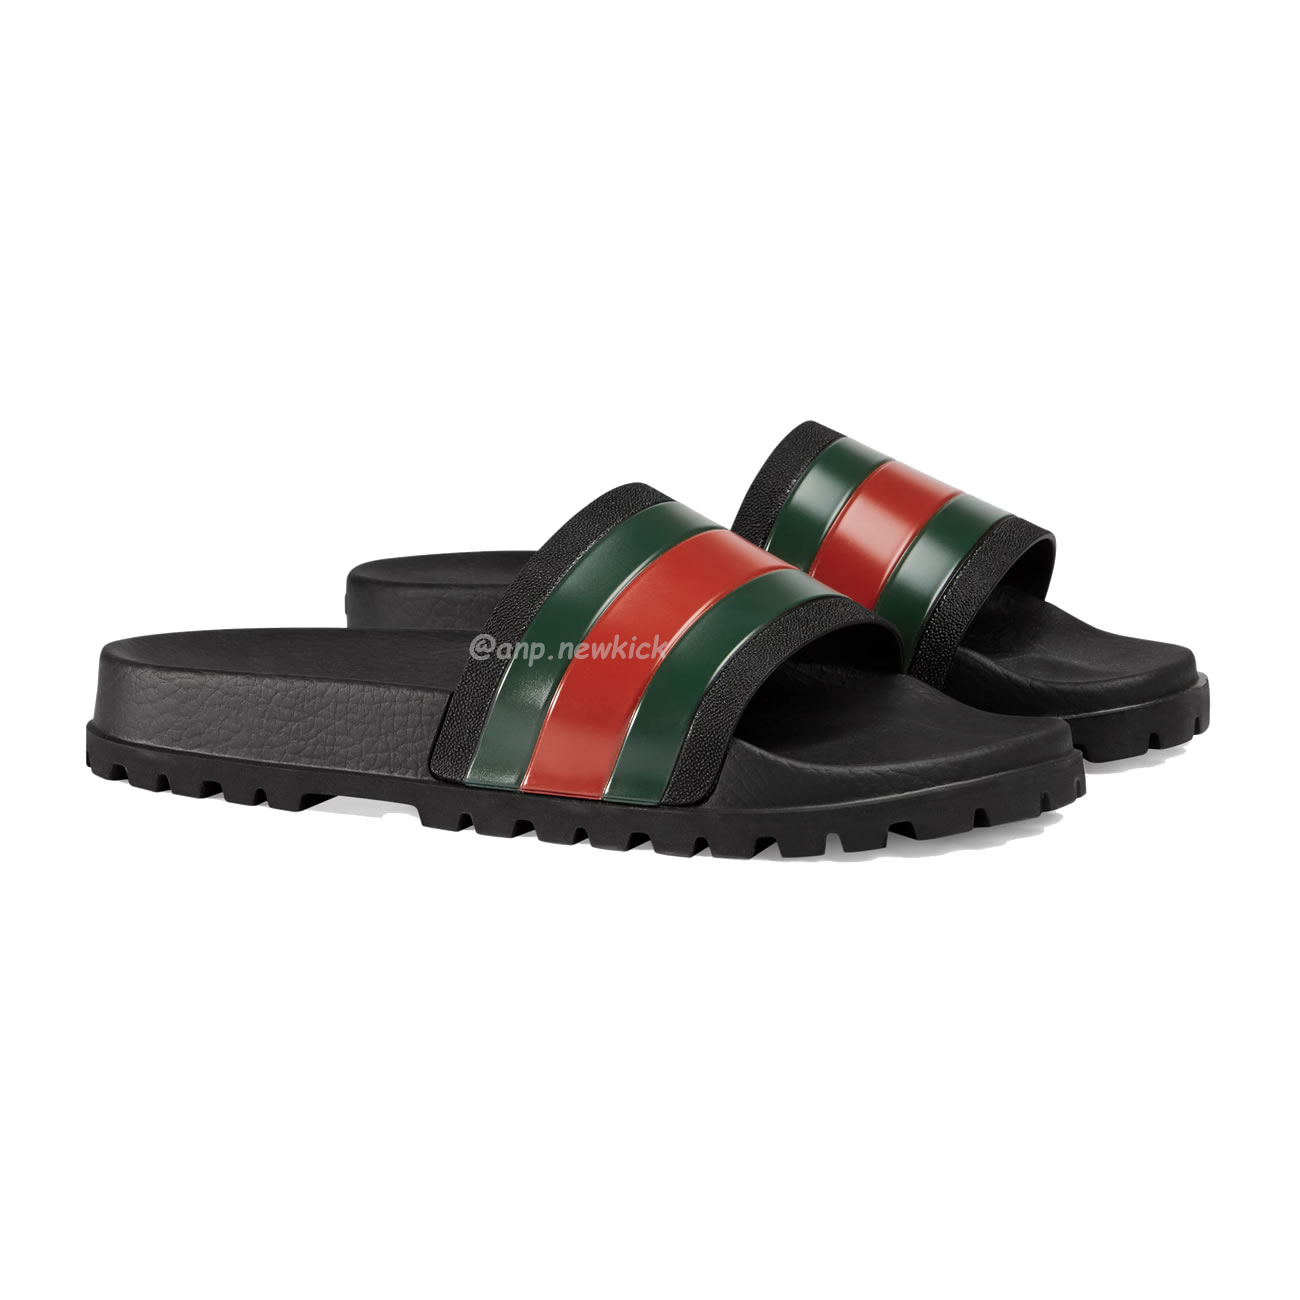 GUCCI Men's woven leather sandals 429469 GIB10 1098